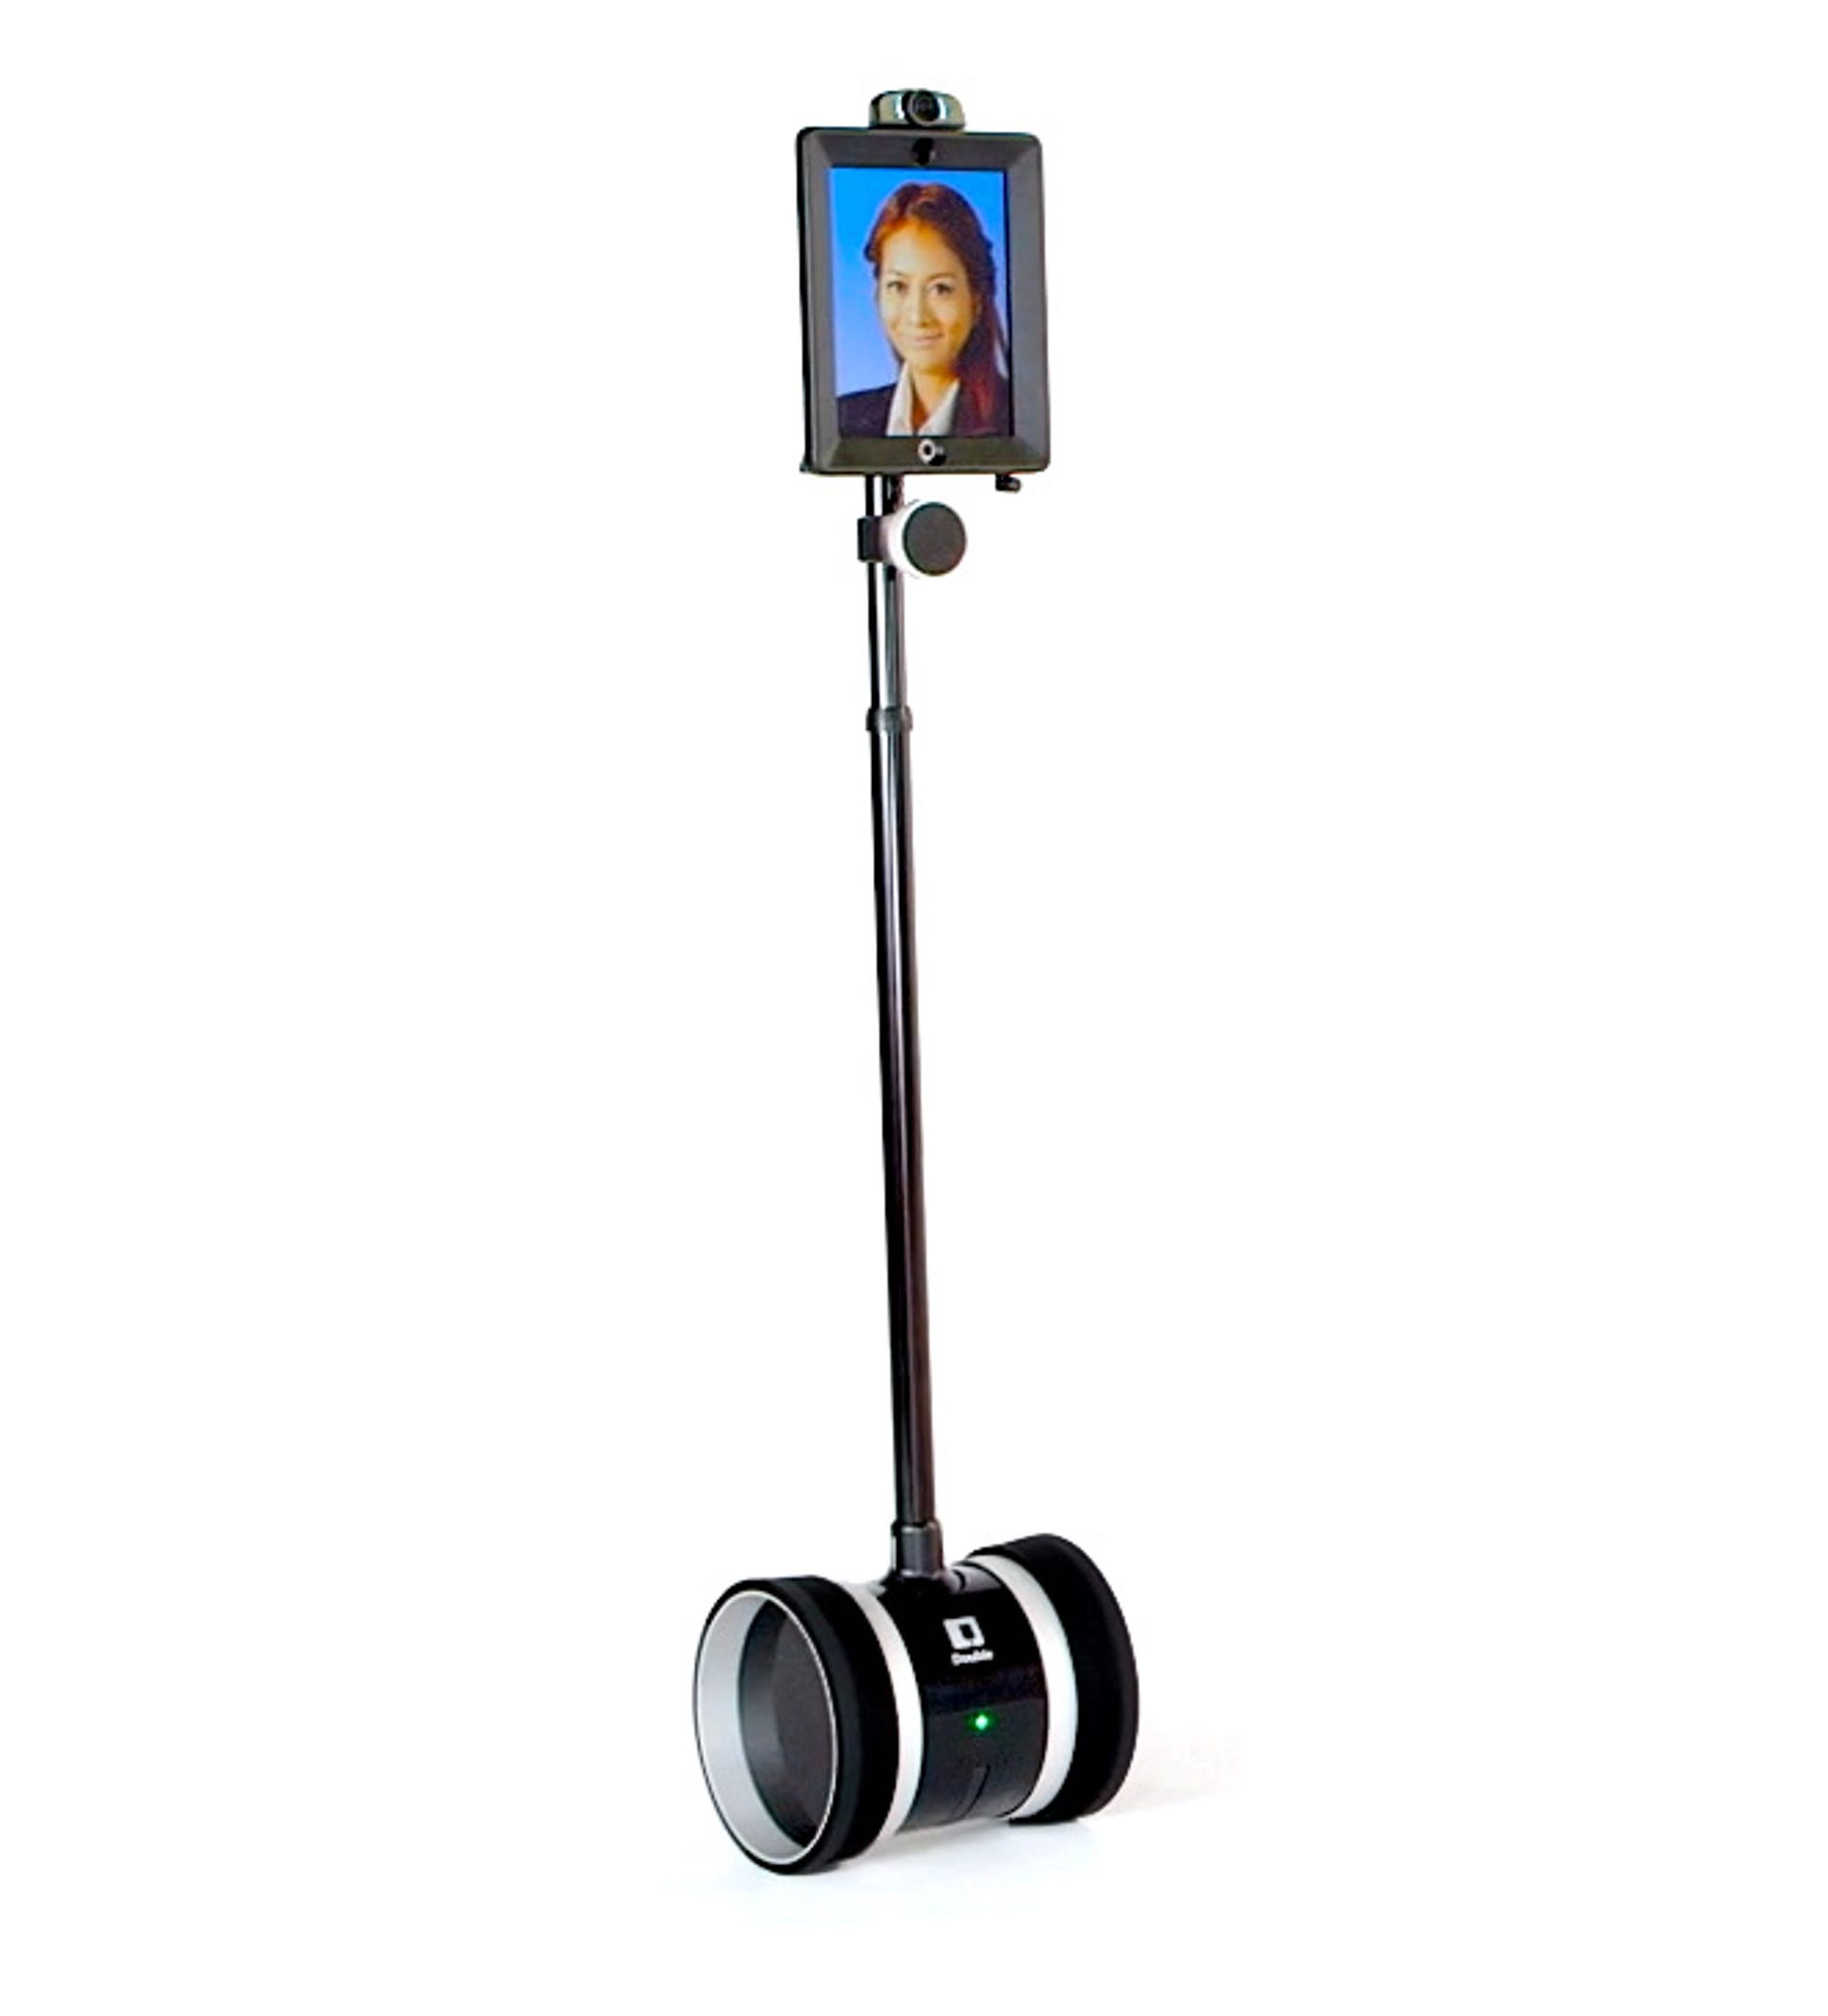 Double Robotics' new Double 2​ telepresence robot gets a better camera and navigation abilities.